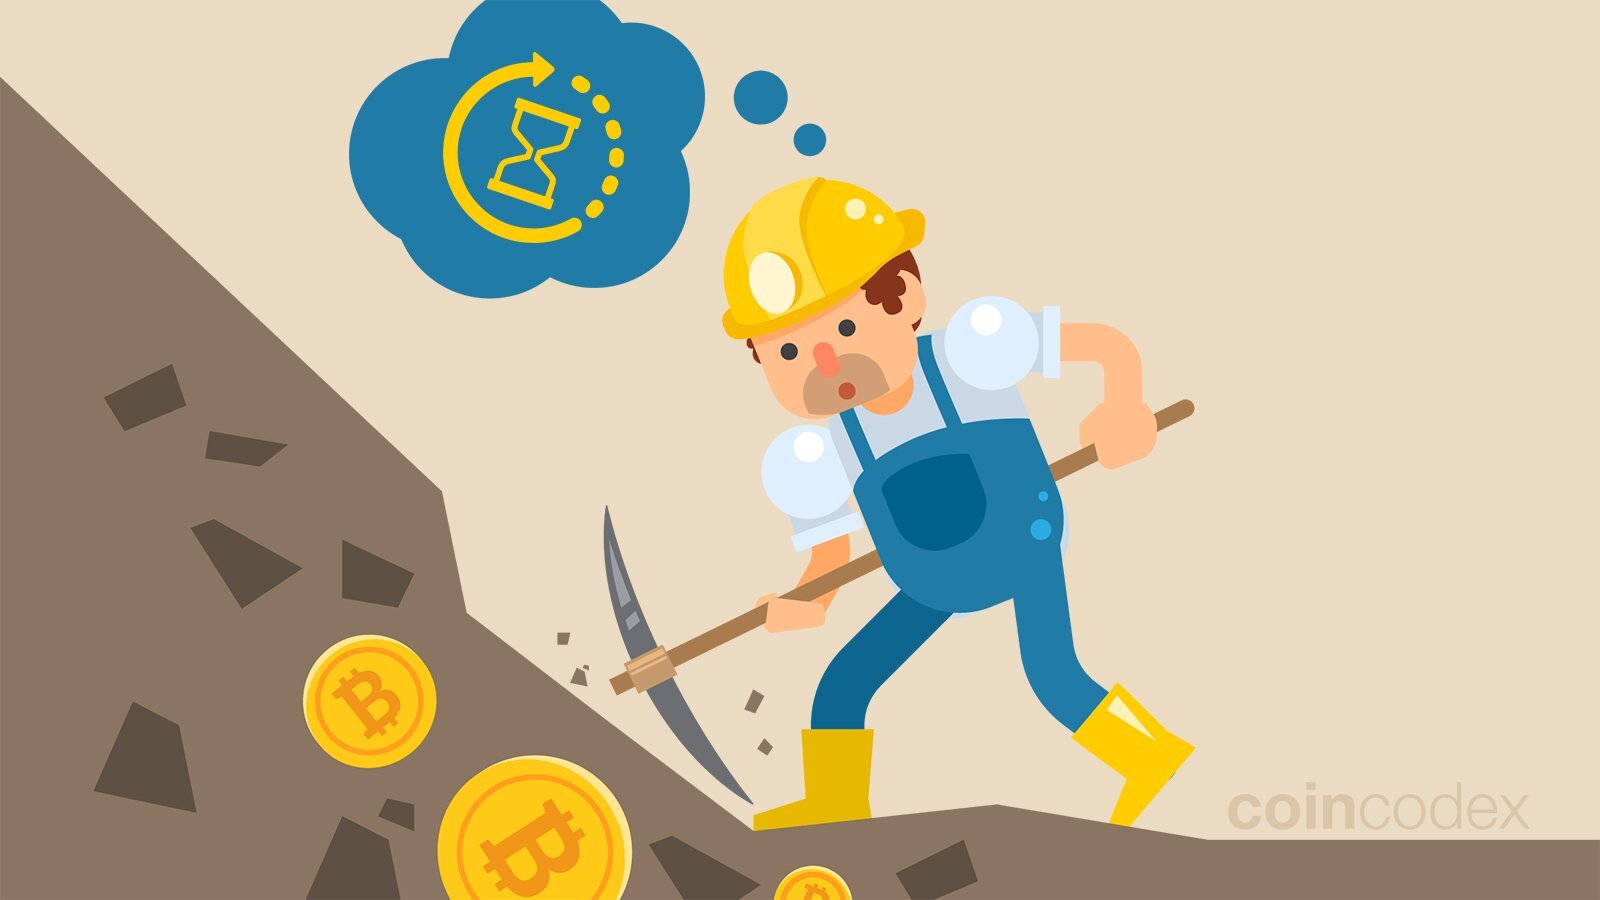 How Long does It Take to Mine 1 Bitcoin? — Techslang